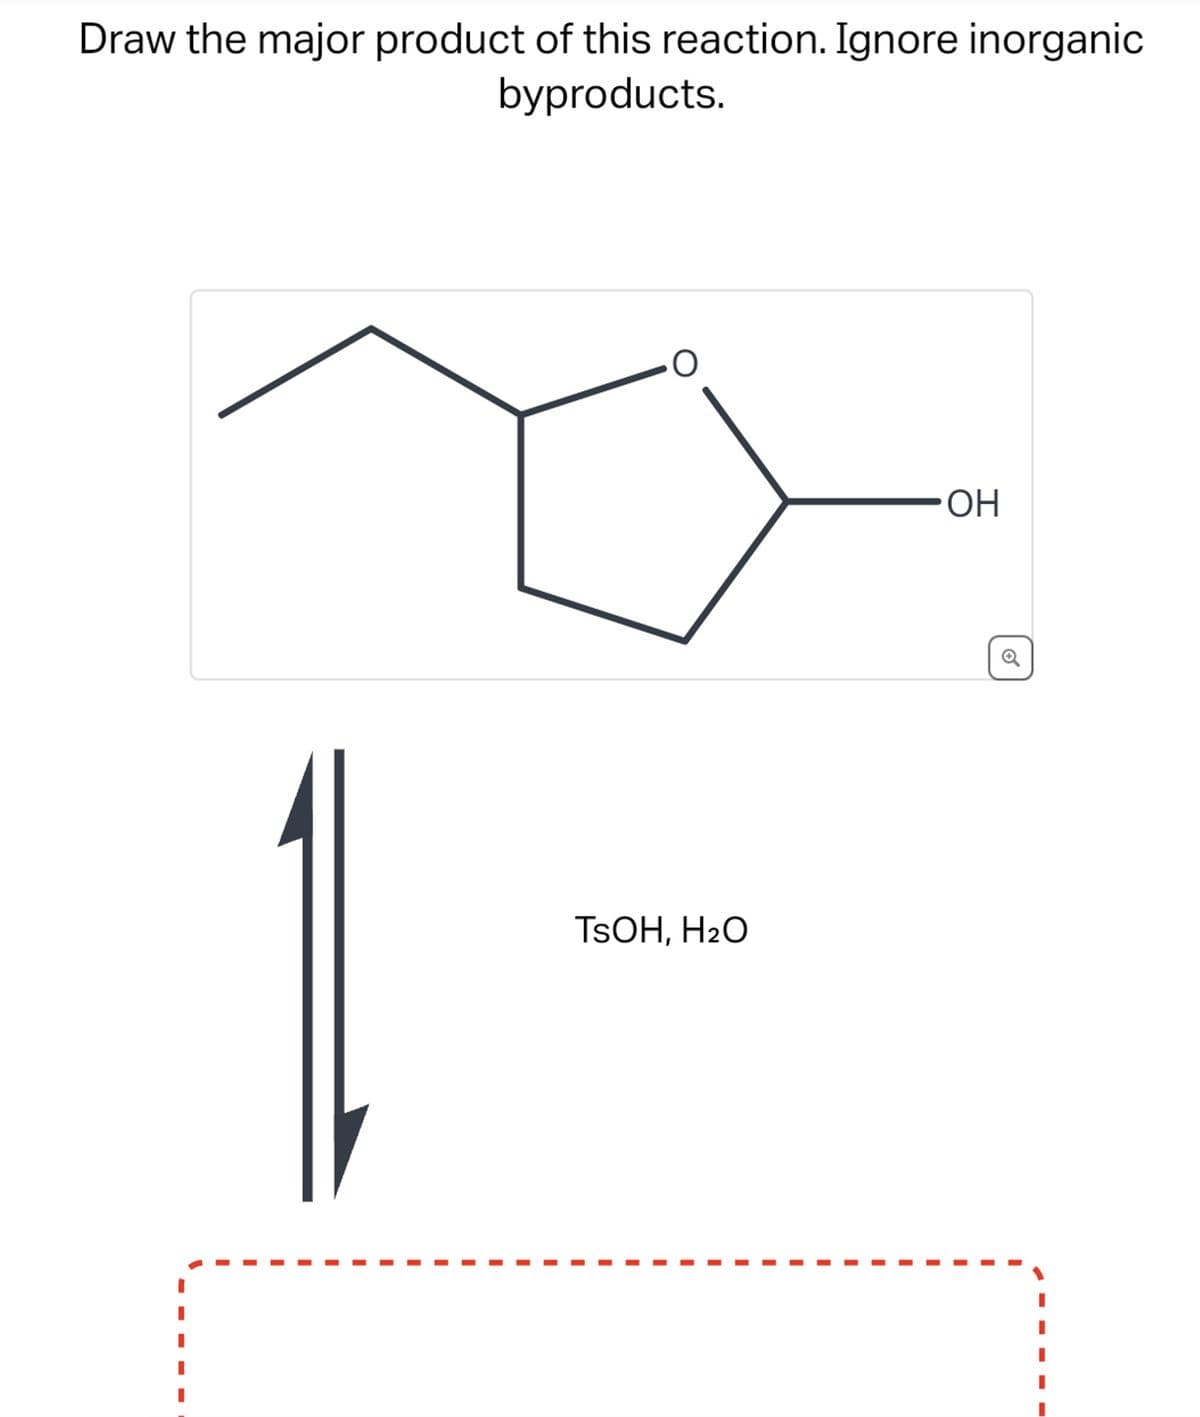 Draw the major product of this reaction. Ignore inorganic
byproducts.
TSOH, H₂O
OH